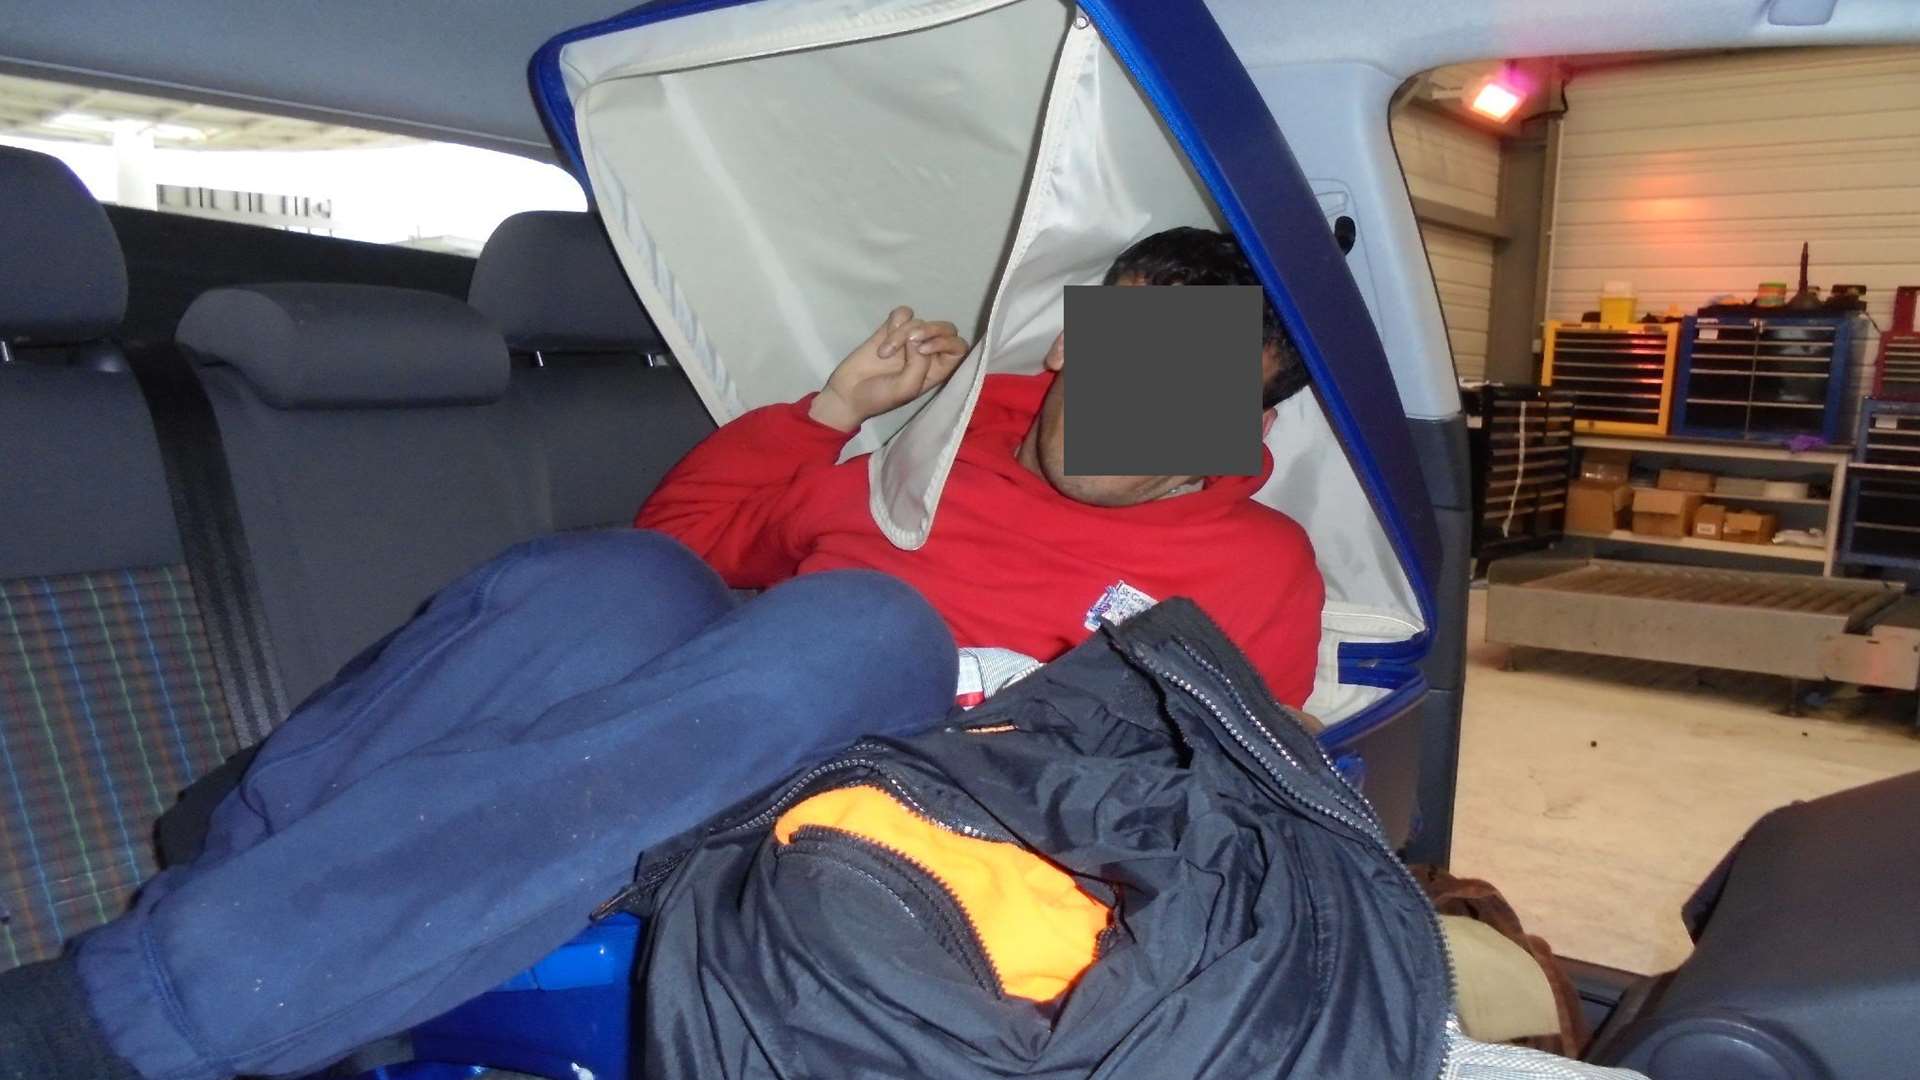 The Iraqi man was discovered trying to hide in the suitcase in the back of a car. Picture: Home Office